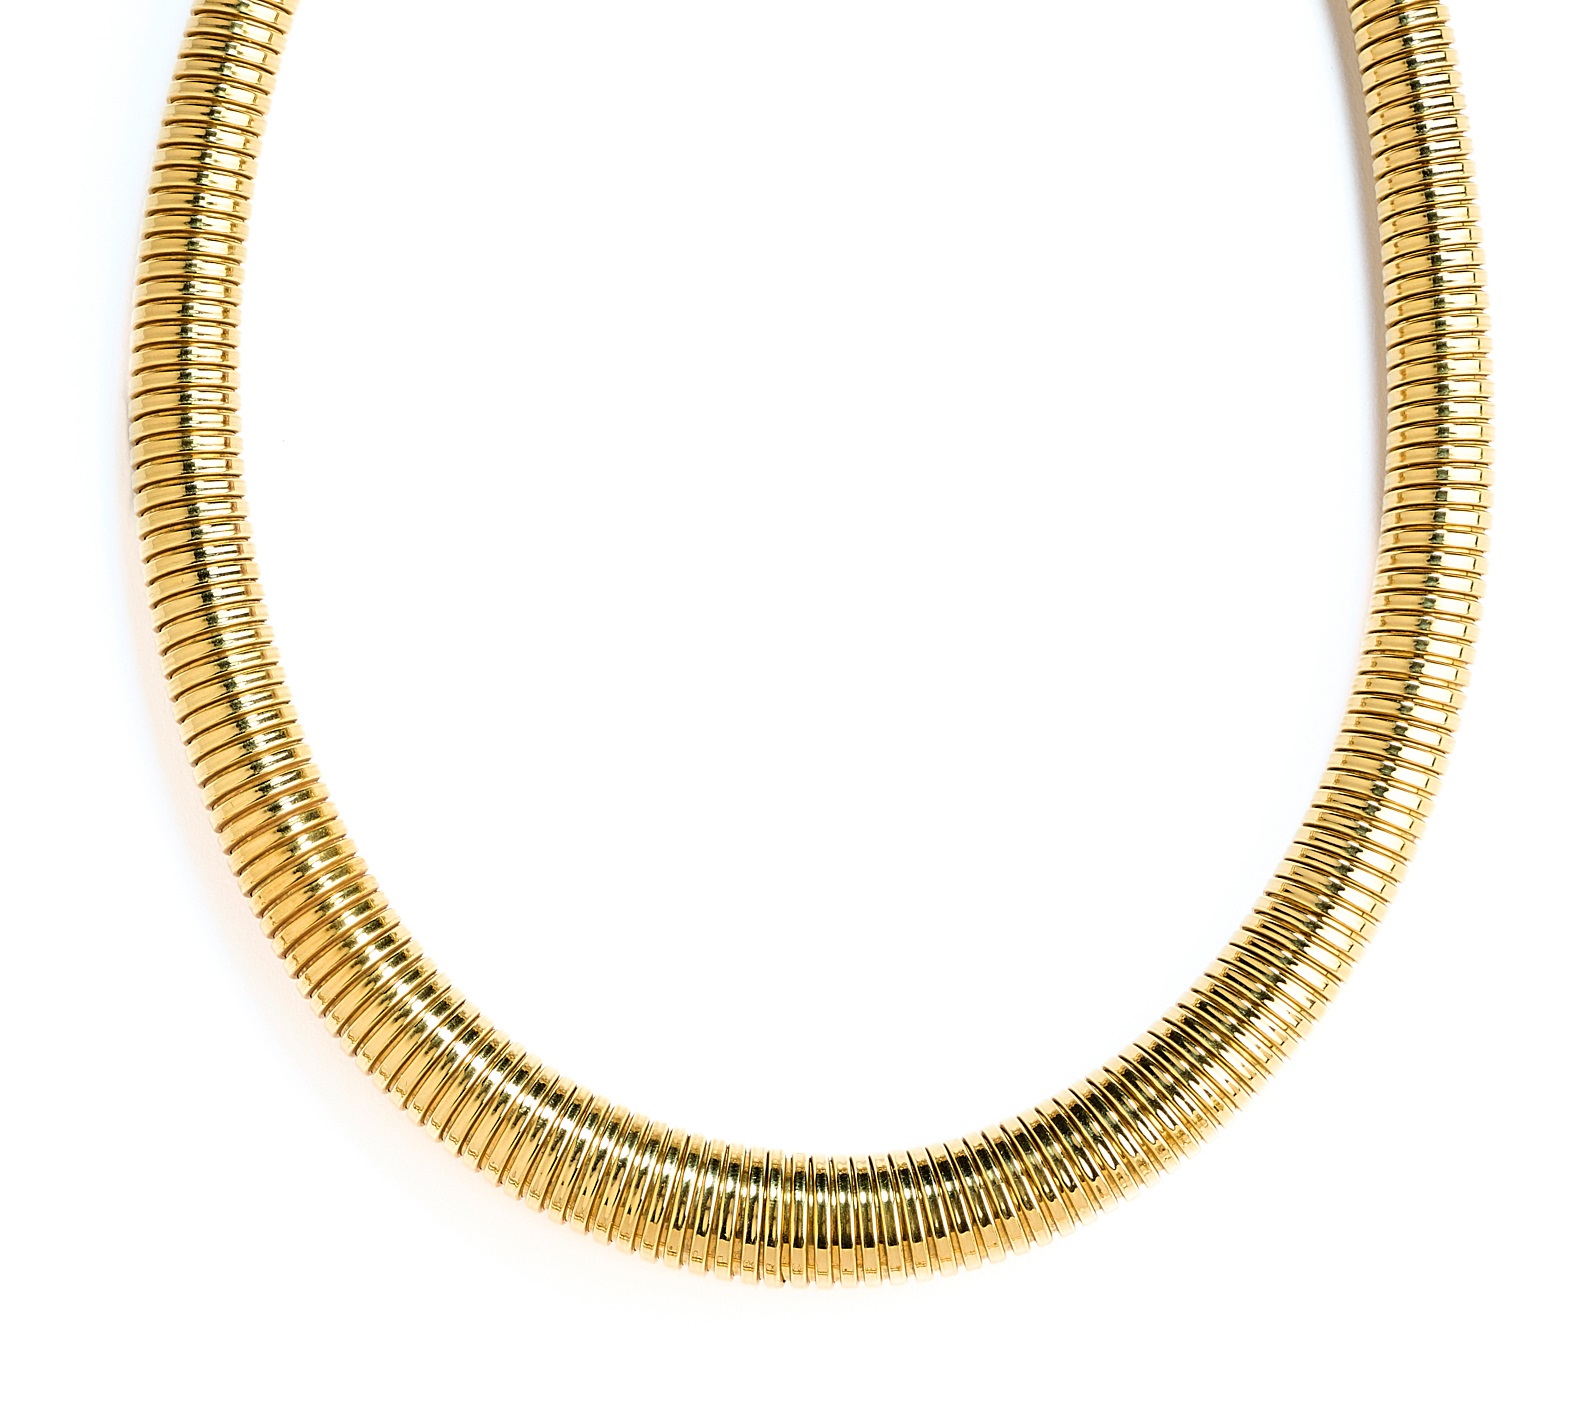 GOLD GASPIPE NECKLACE, 1996